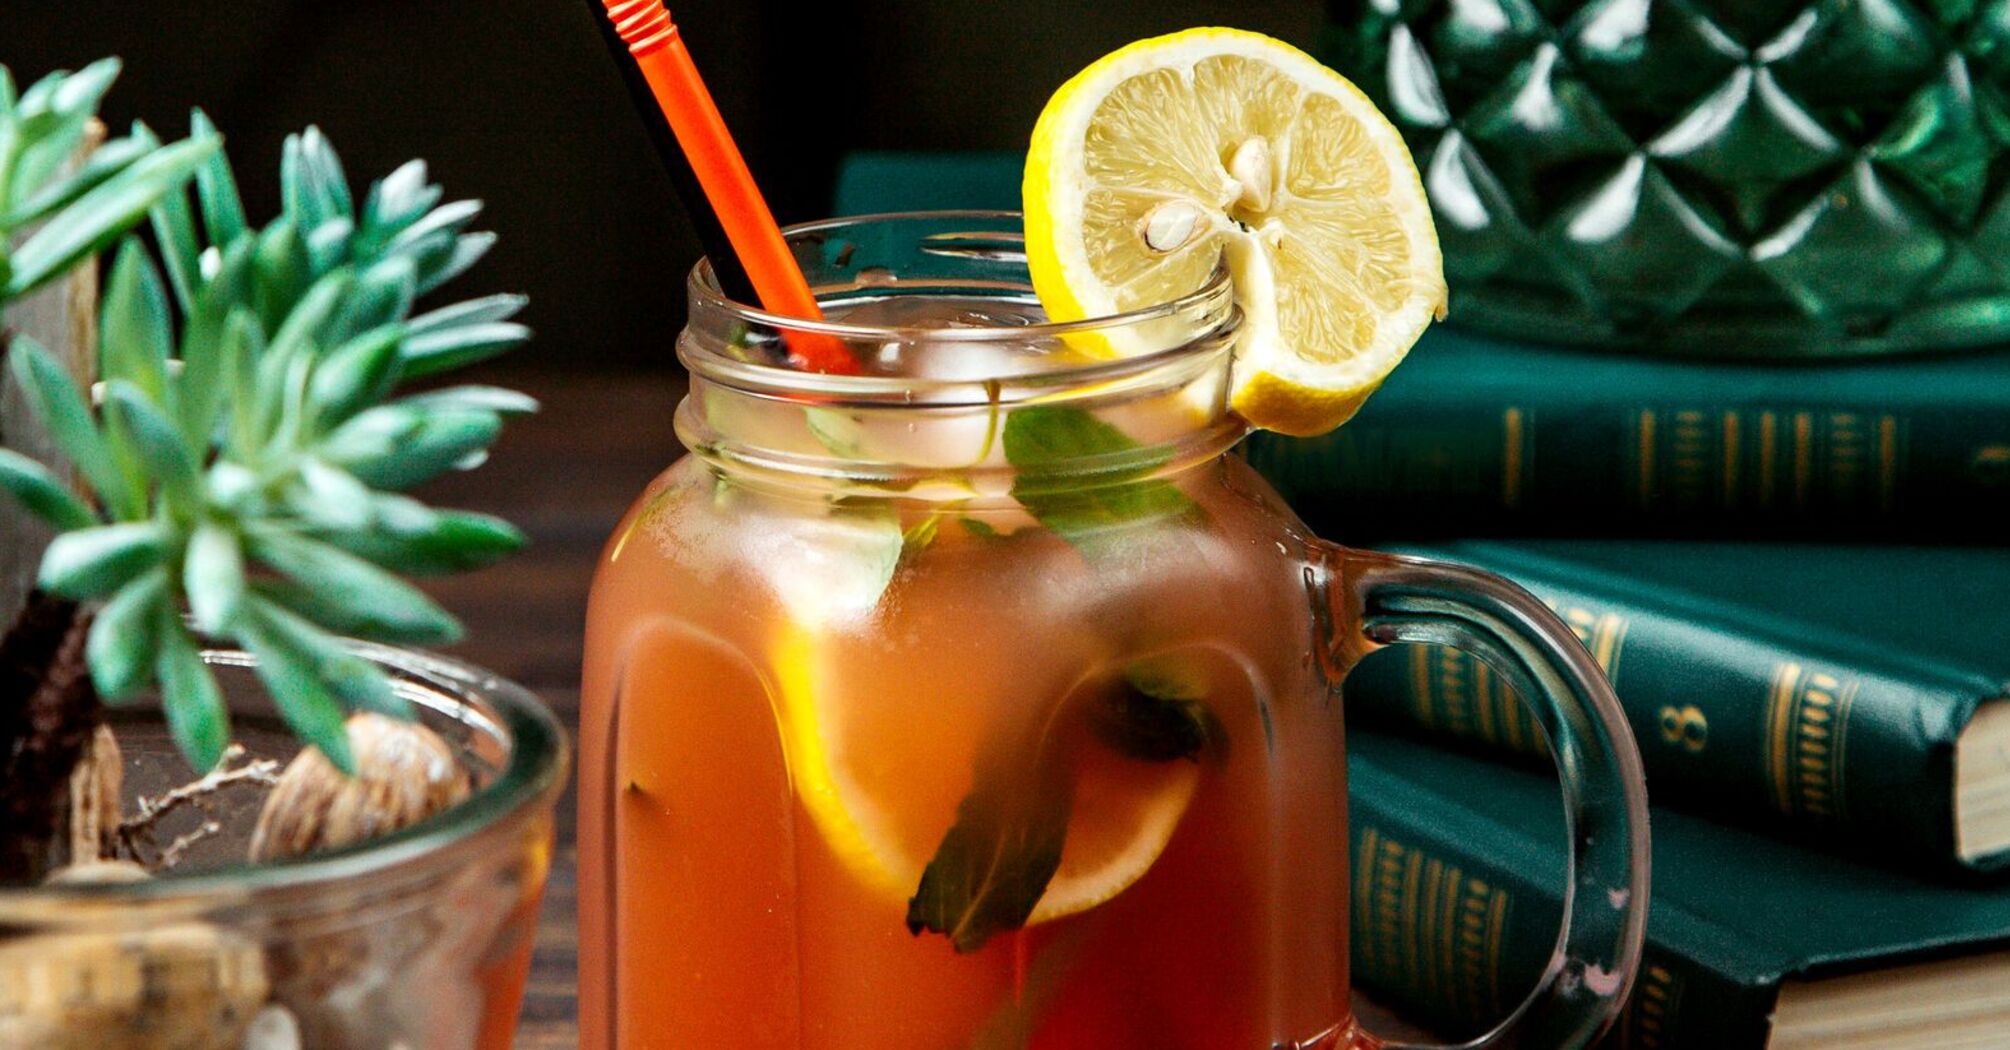 Refreshing iced tea: what you need when the heat is raging outside